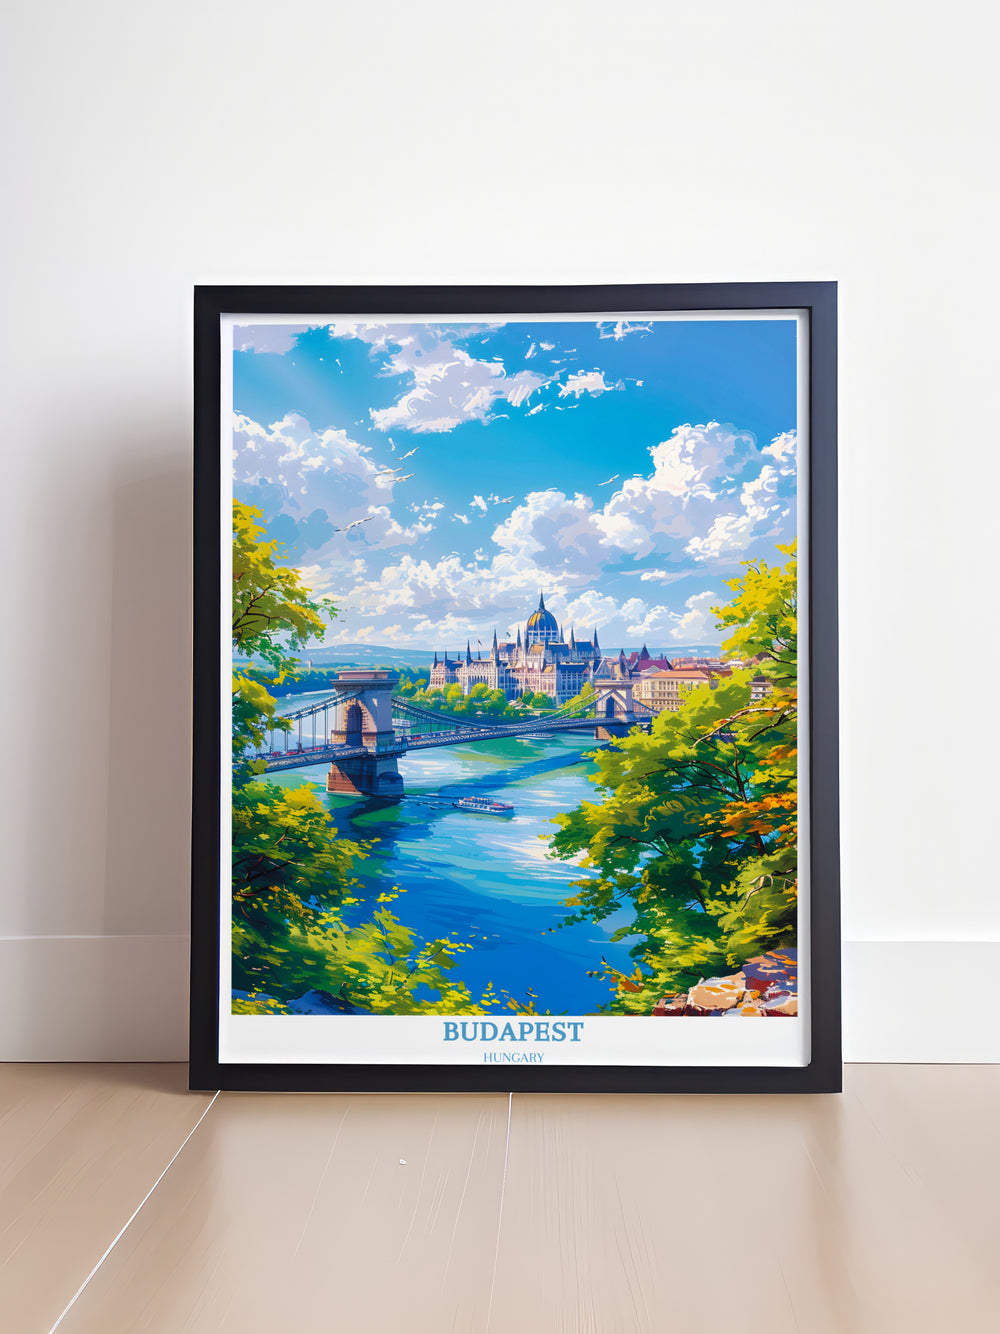 Adorn your walls with Budapest travel prints, featuring the iconic Széchenyi Chain Bridge and the city's charm, perfect for art lovers seeking European elegance in home decor